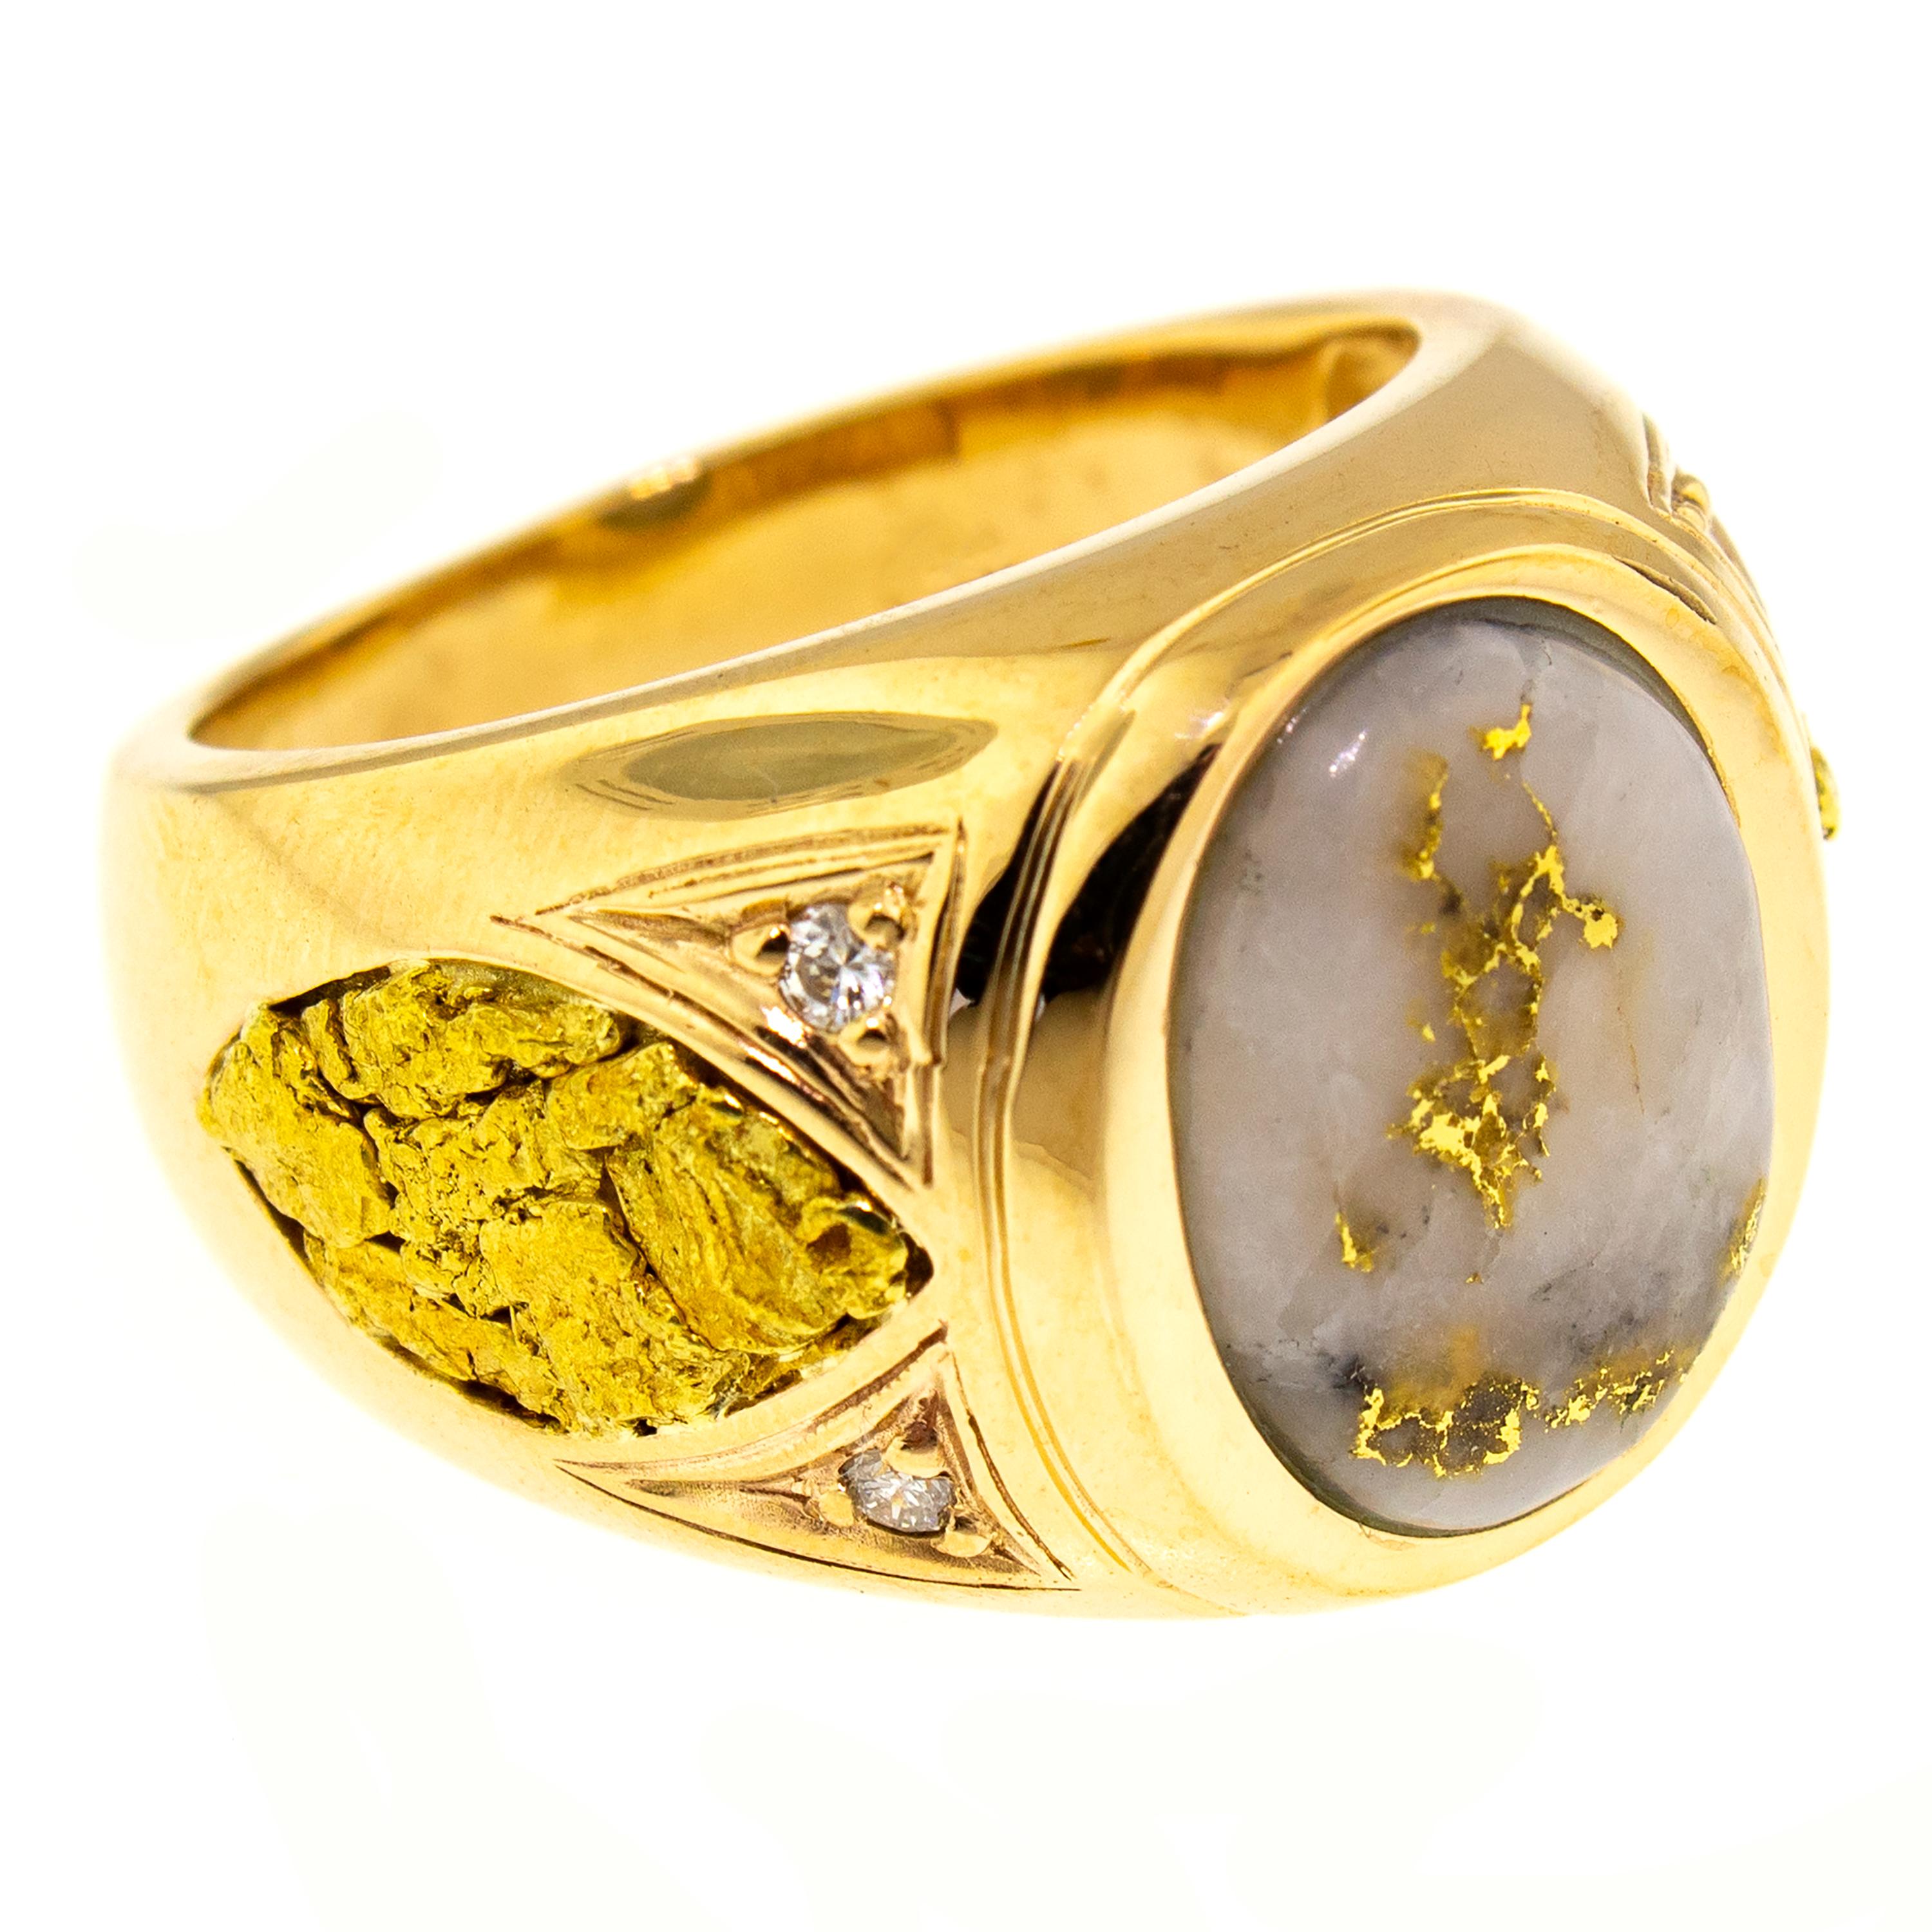 Exquisitely rare natural gold bearing quartz and gold nuggets are the focal points of this elegant and unusual men's ring. The classic shape and styling are a perfect frame for the natural material choices, and the color of the two types of natural